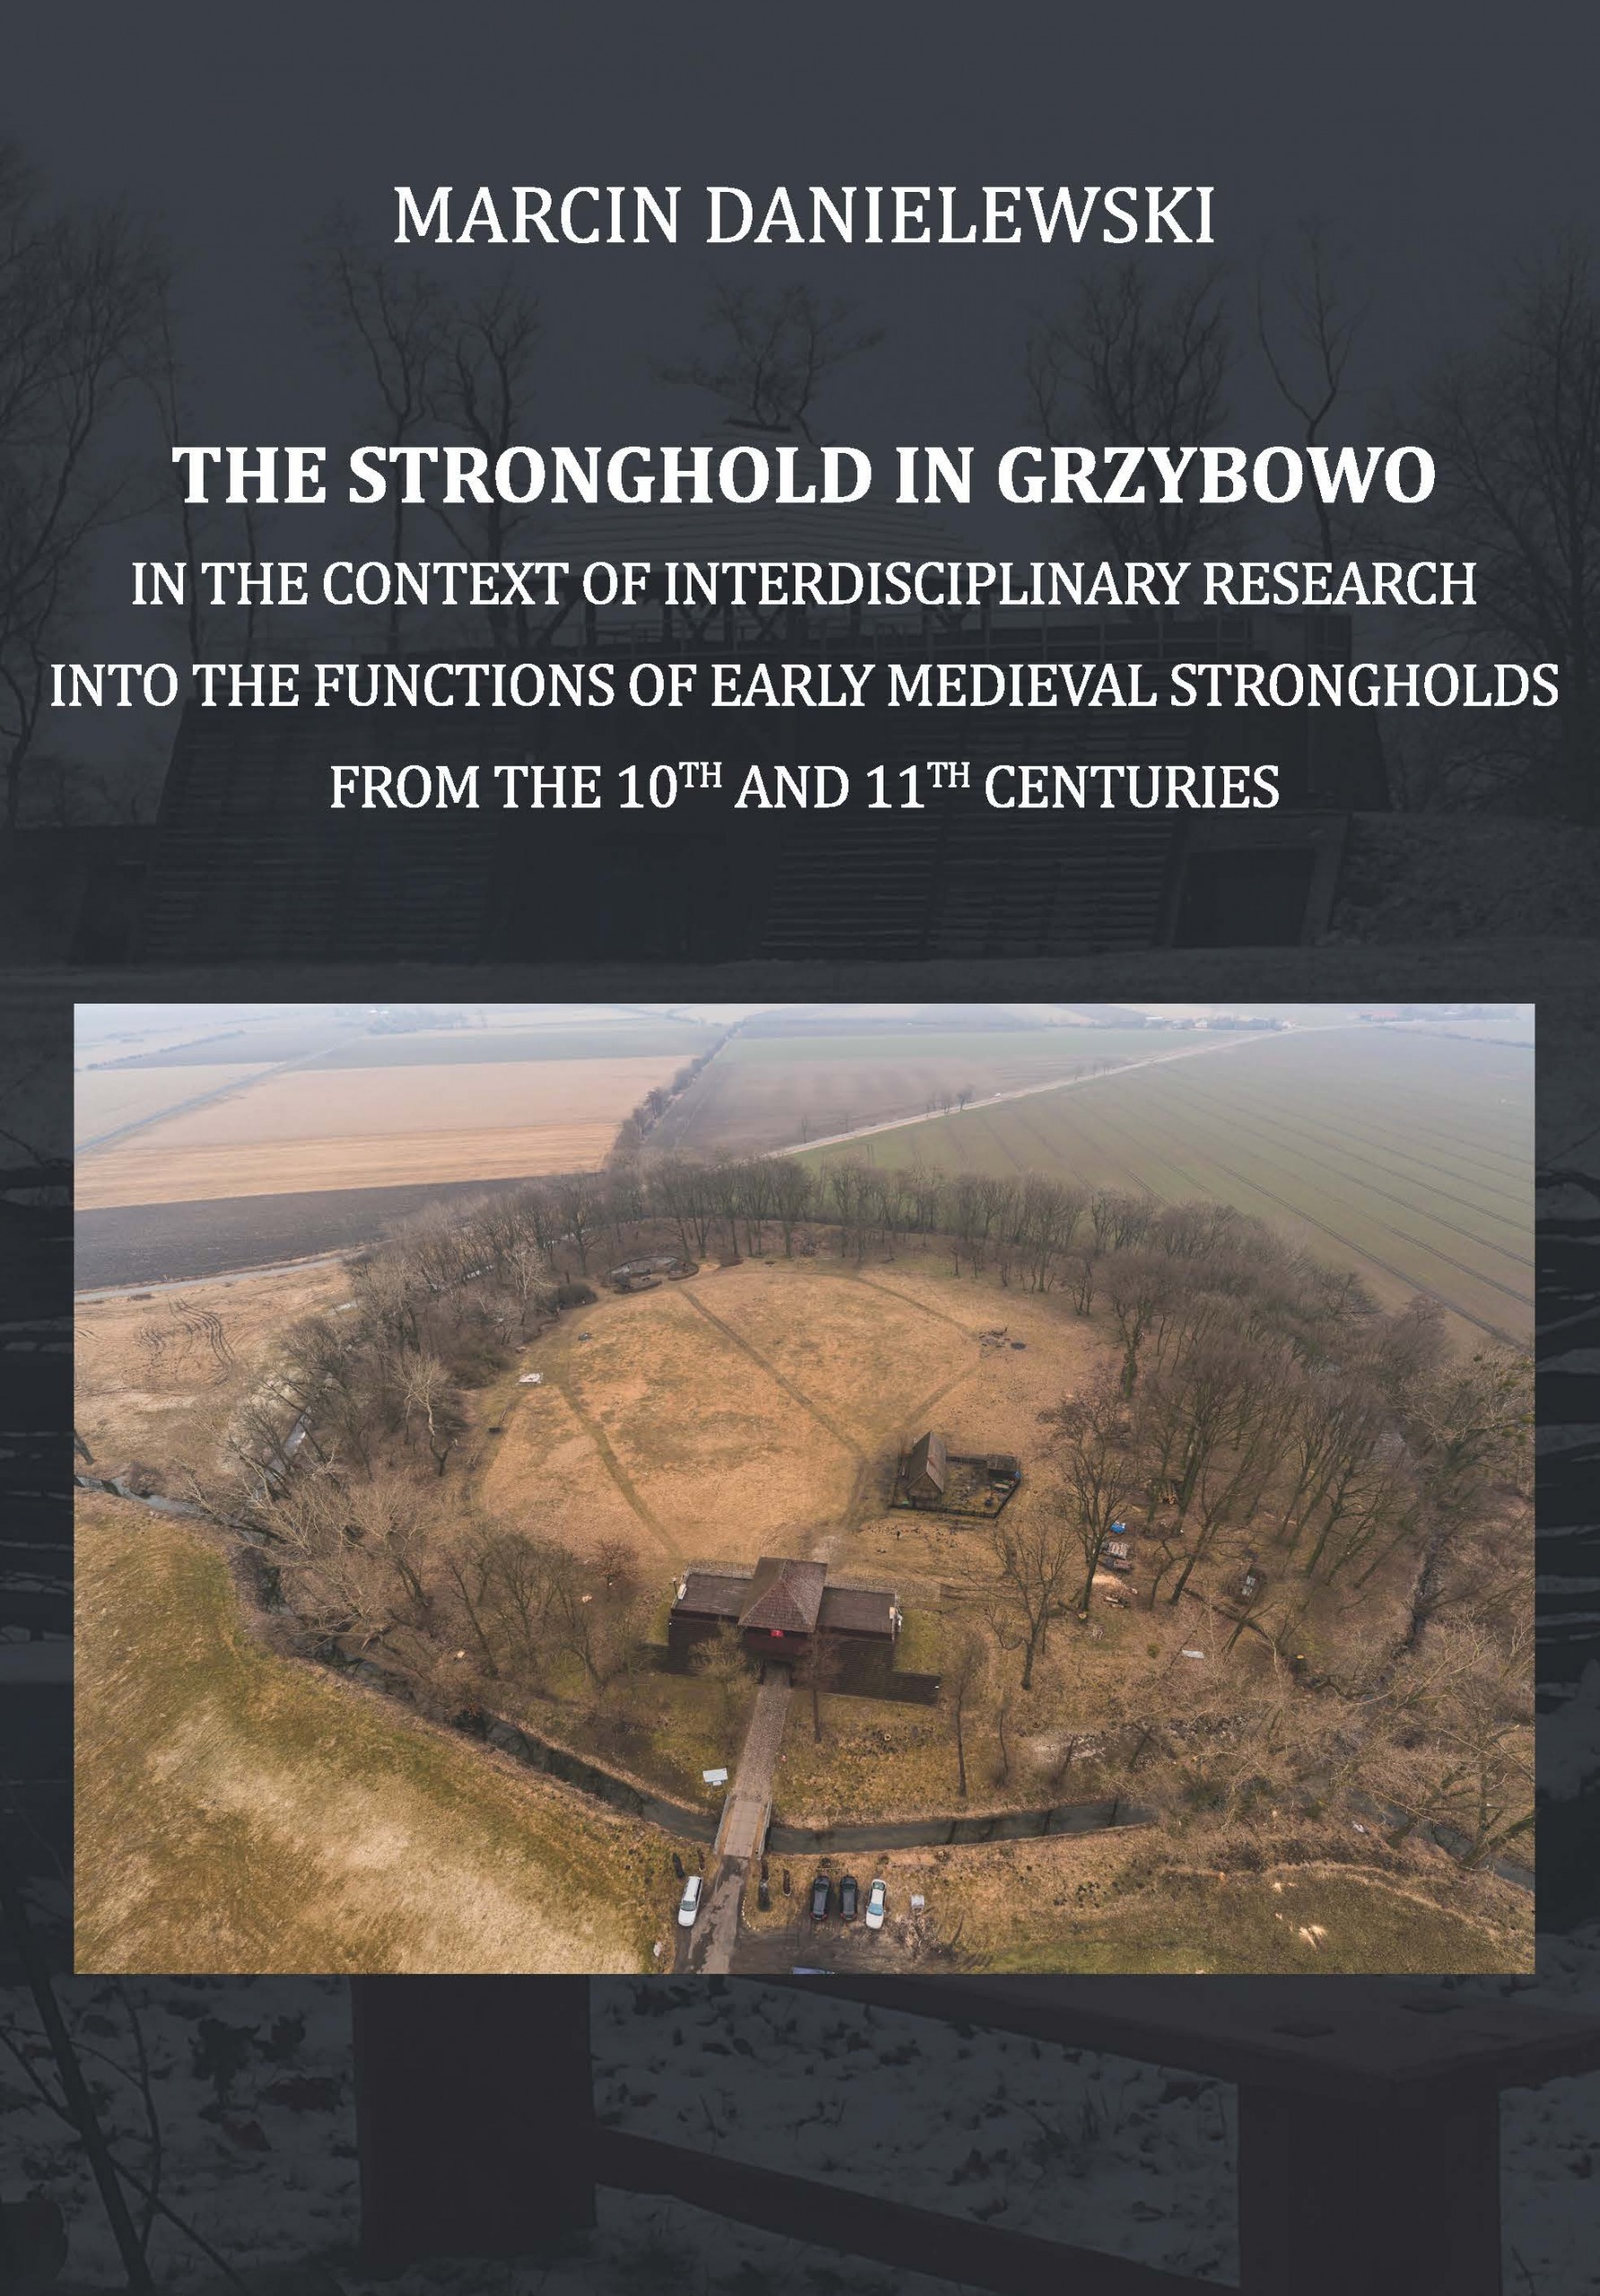 The Stronghold in Grzybowo 